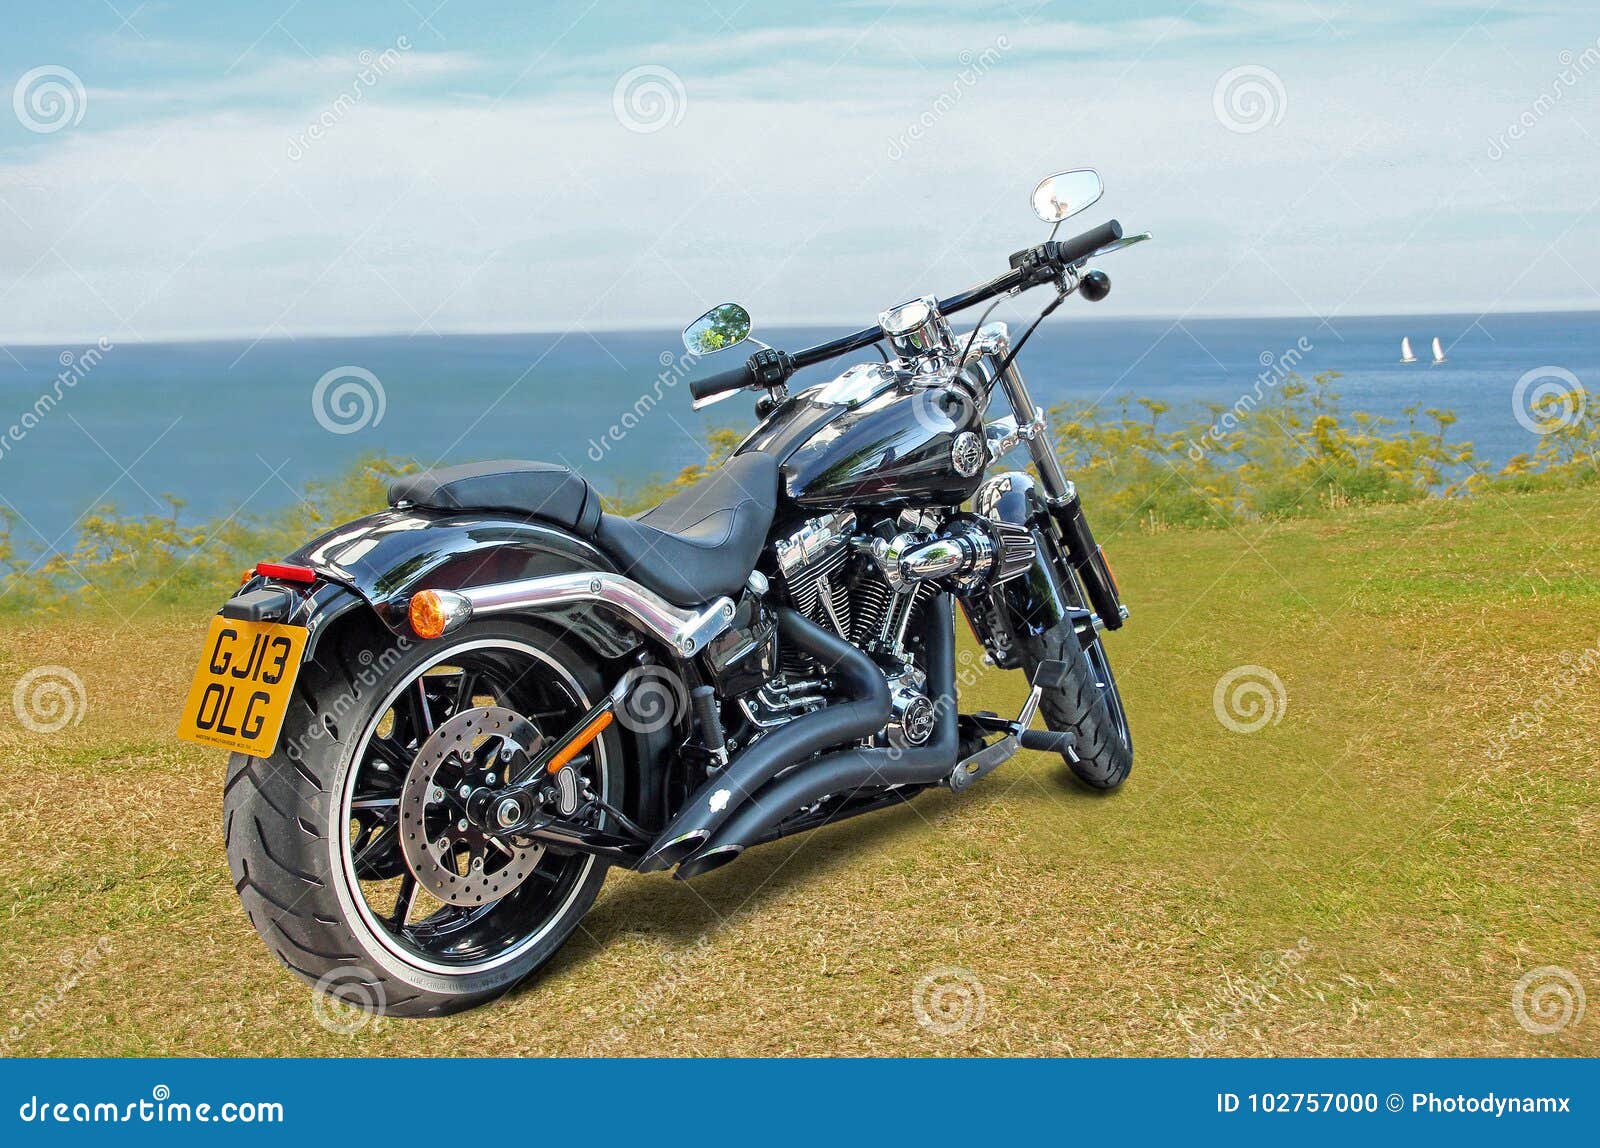 230 Harley Sea Photos Free Royalty Free Stock Photos From Dreamstime